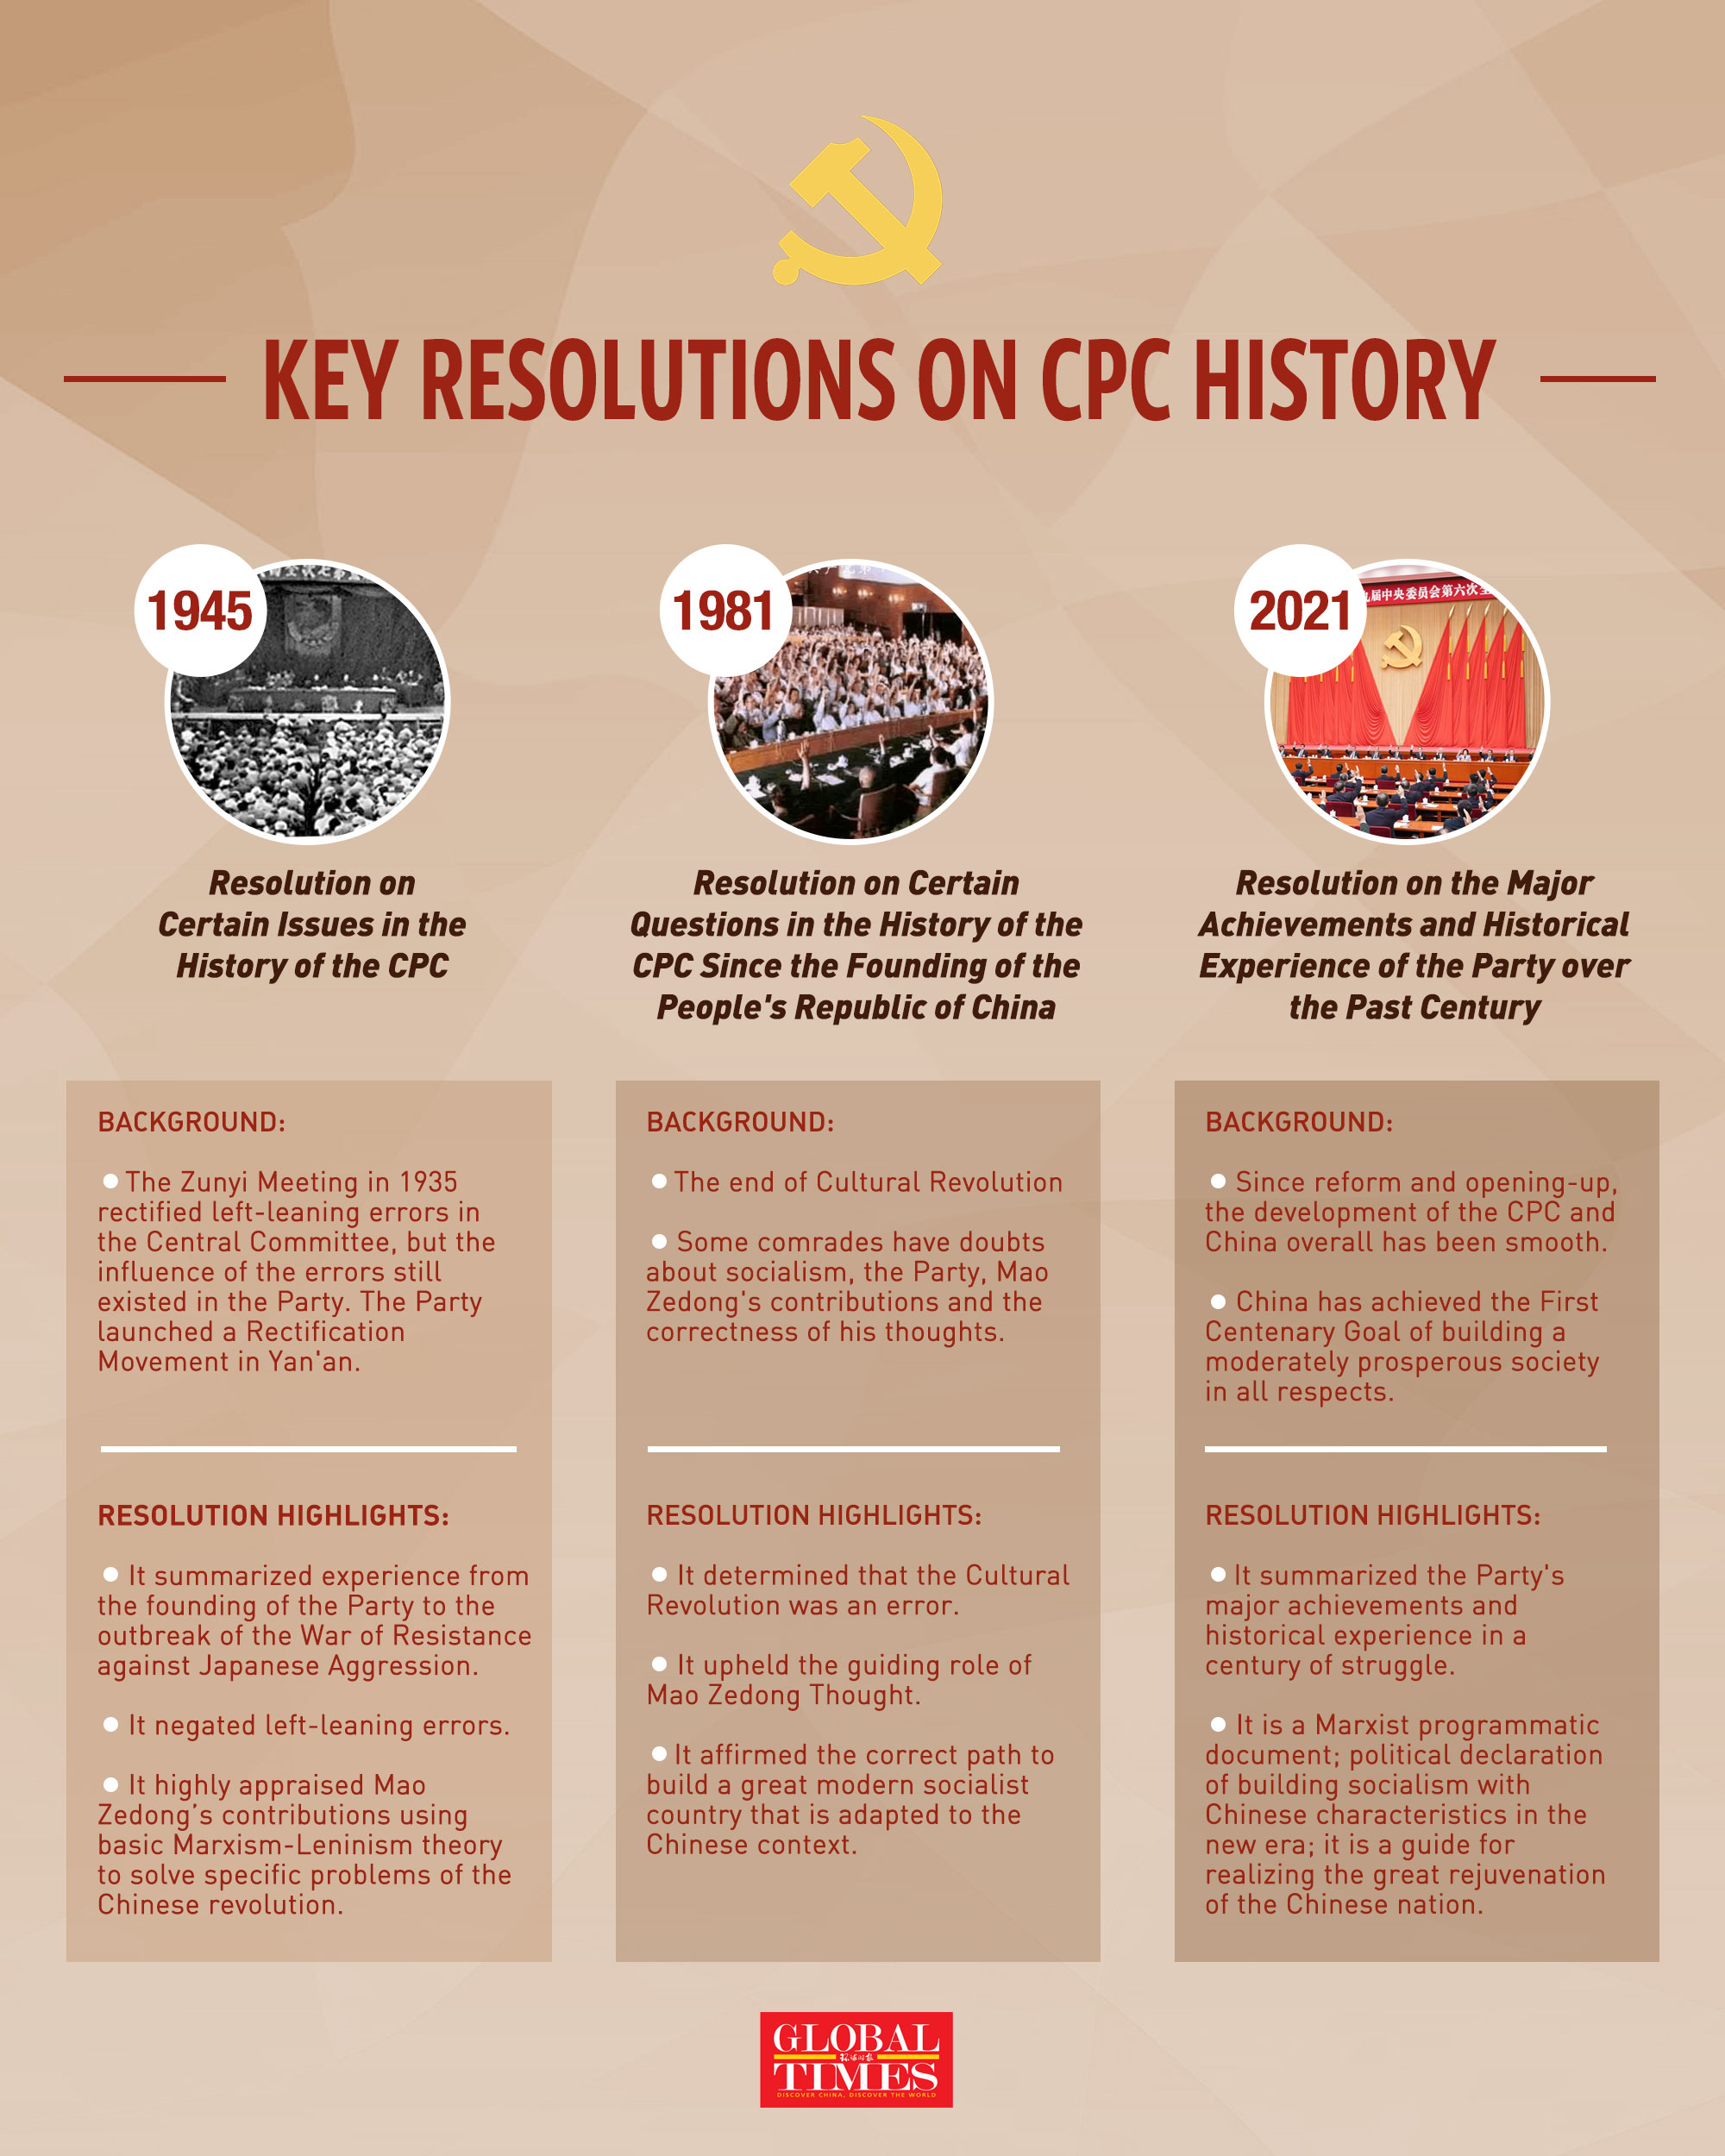 In the CPC’s history, two resolutions focused on studying historical questions like the Cultural Revolution. The 3rd landmark resolution, adopted at Sixth Plenary Session of the 19th CPC Central Committee, summarizes the Party's achievements and experience over the past century. Graphic: GT